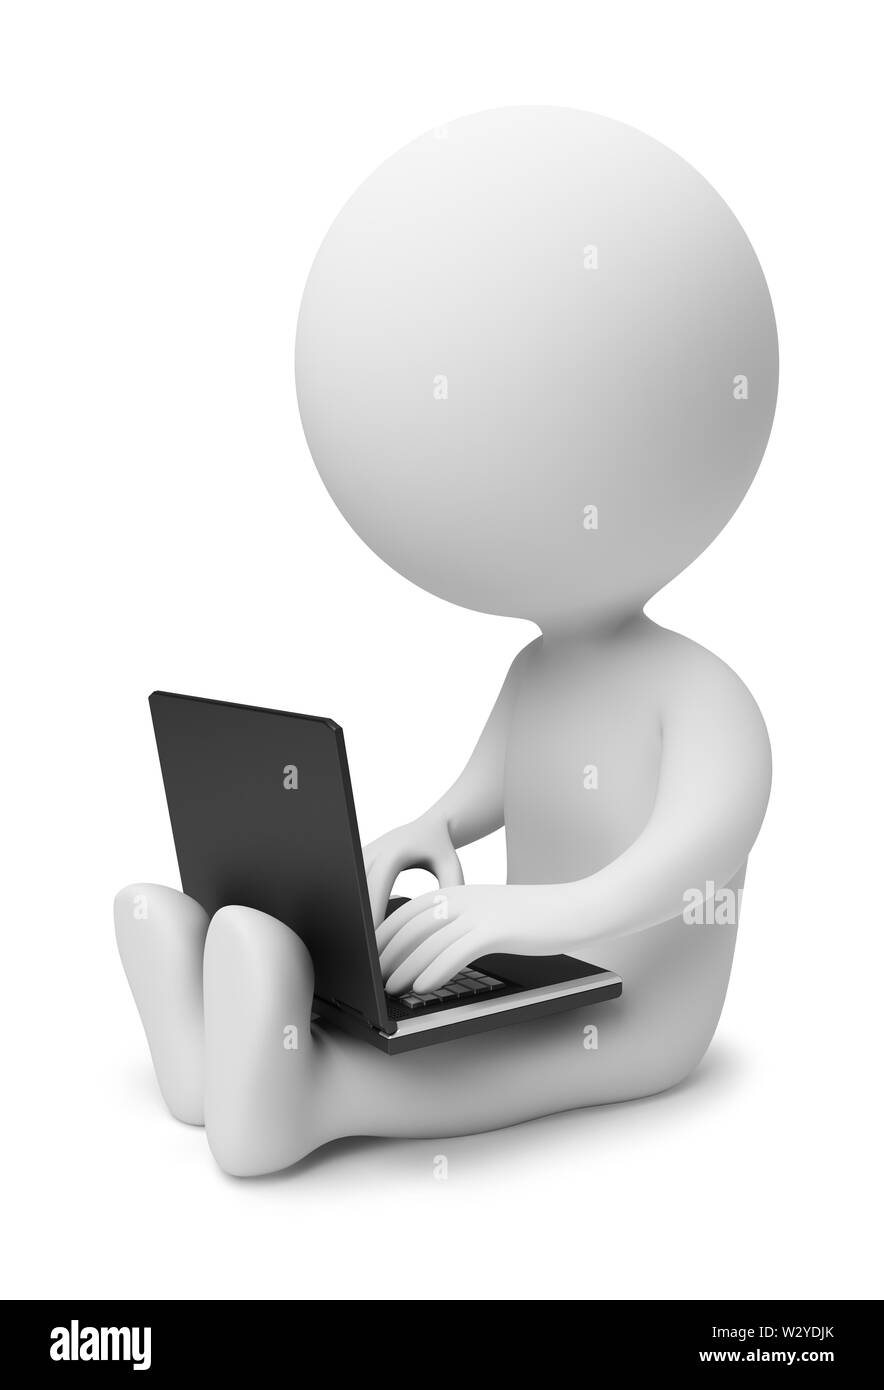 3d small people working on the laptop. 3d image. Isolated white background. Stock Photo